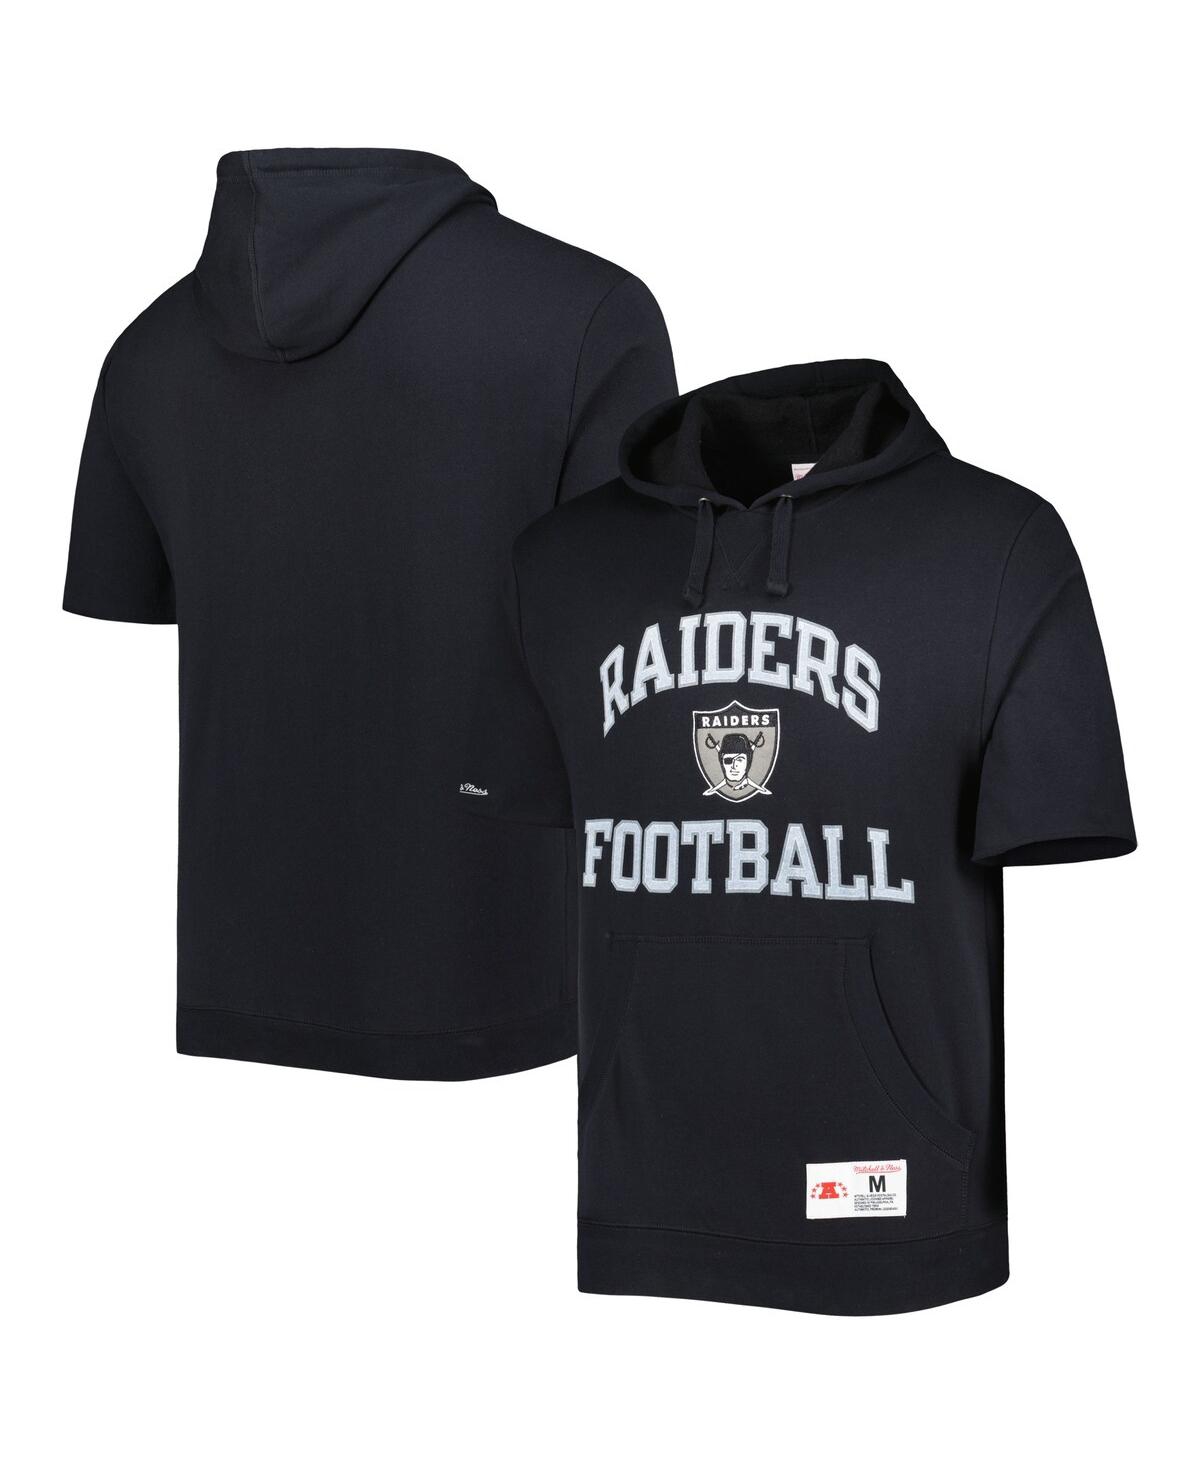 Shop Mitchell & Ness Men's  Black Las Vegas Raiders Washed Short Sleeve Pullover Hoodie